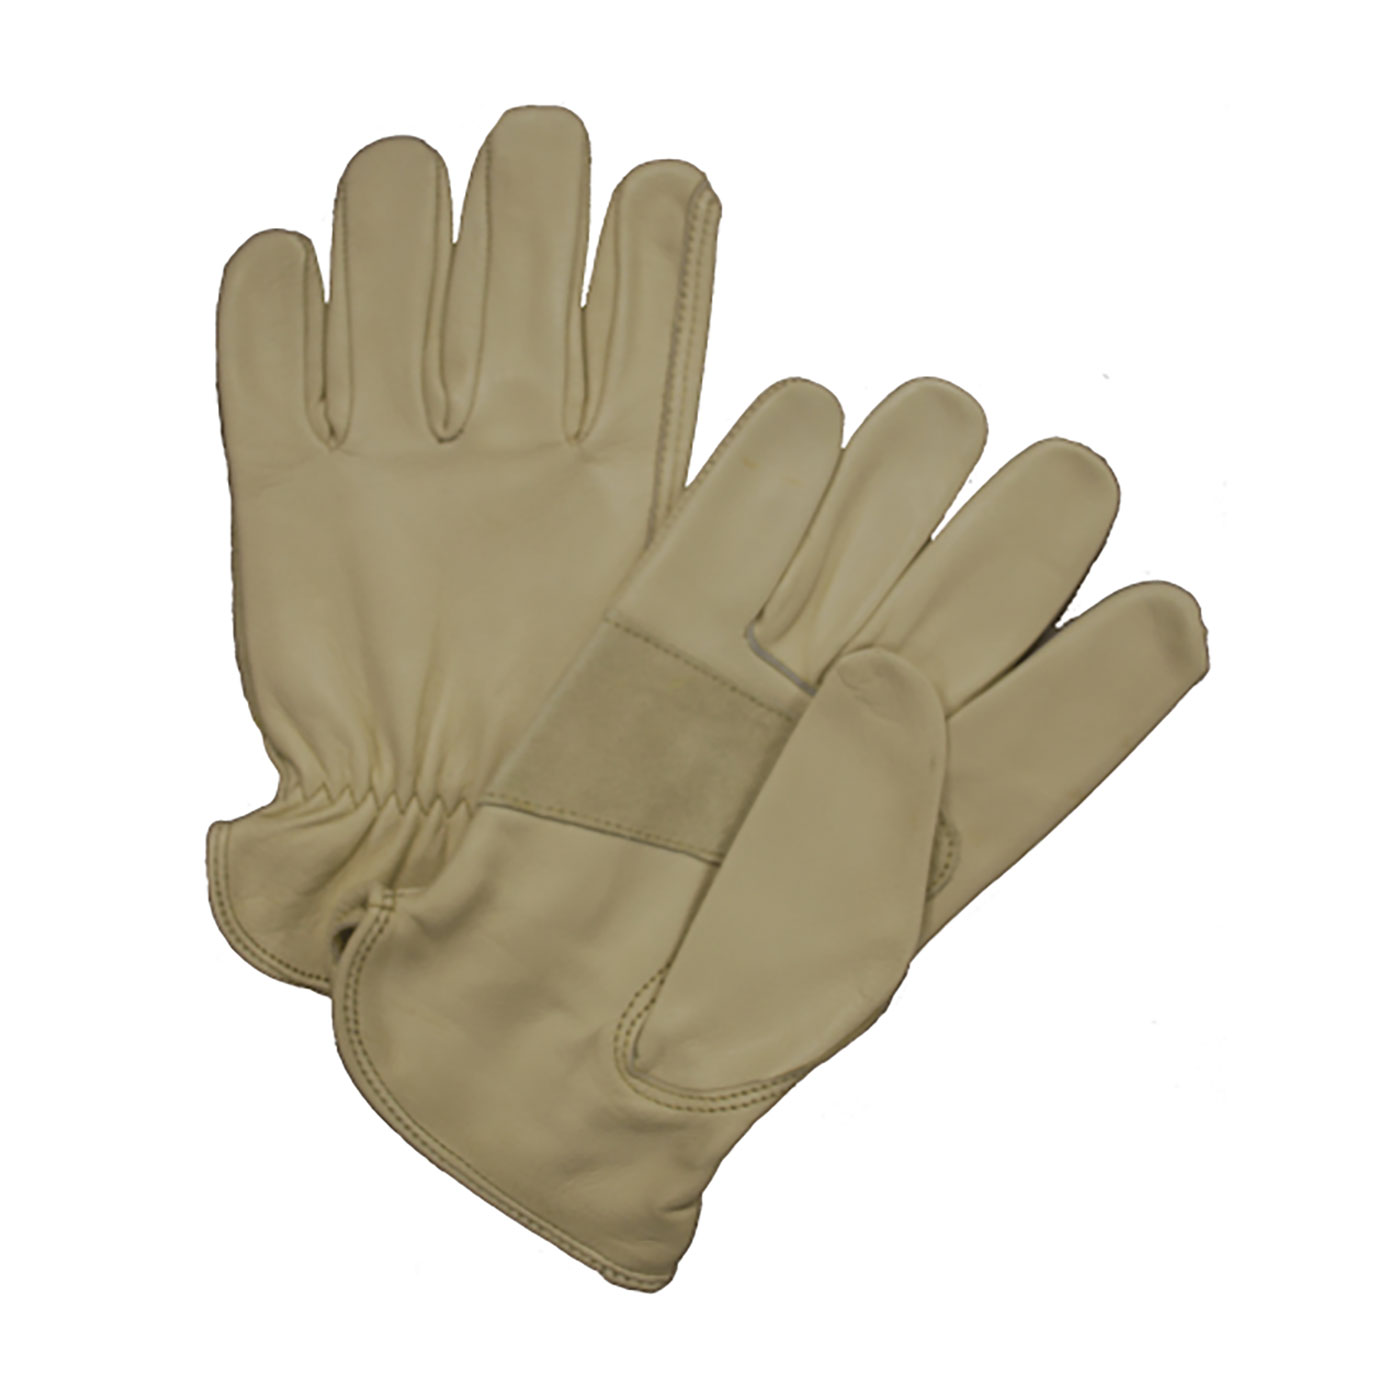 984K PIP® Premium-Grade Top Grain Cowhide Leather Drivers Glove w/ Keystone Thumb and Reinforced Palms